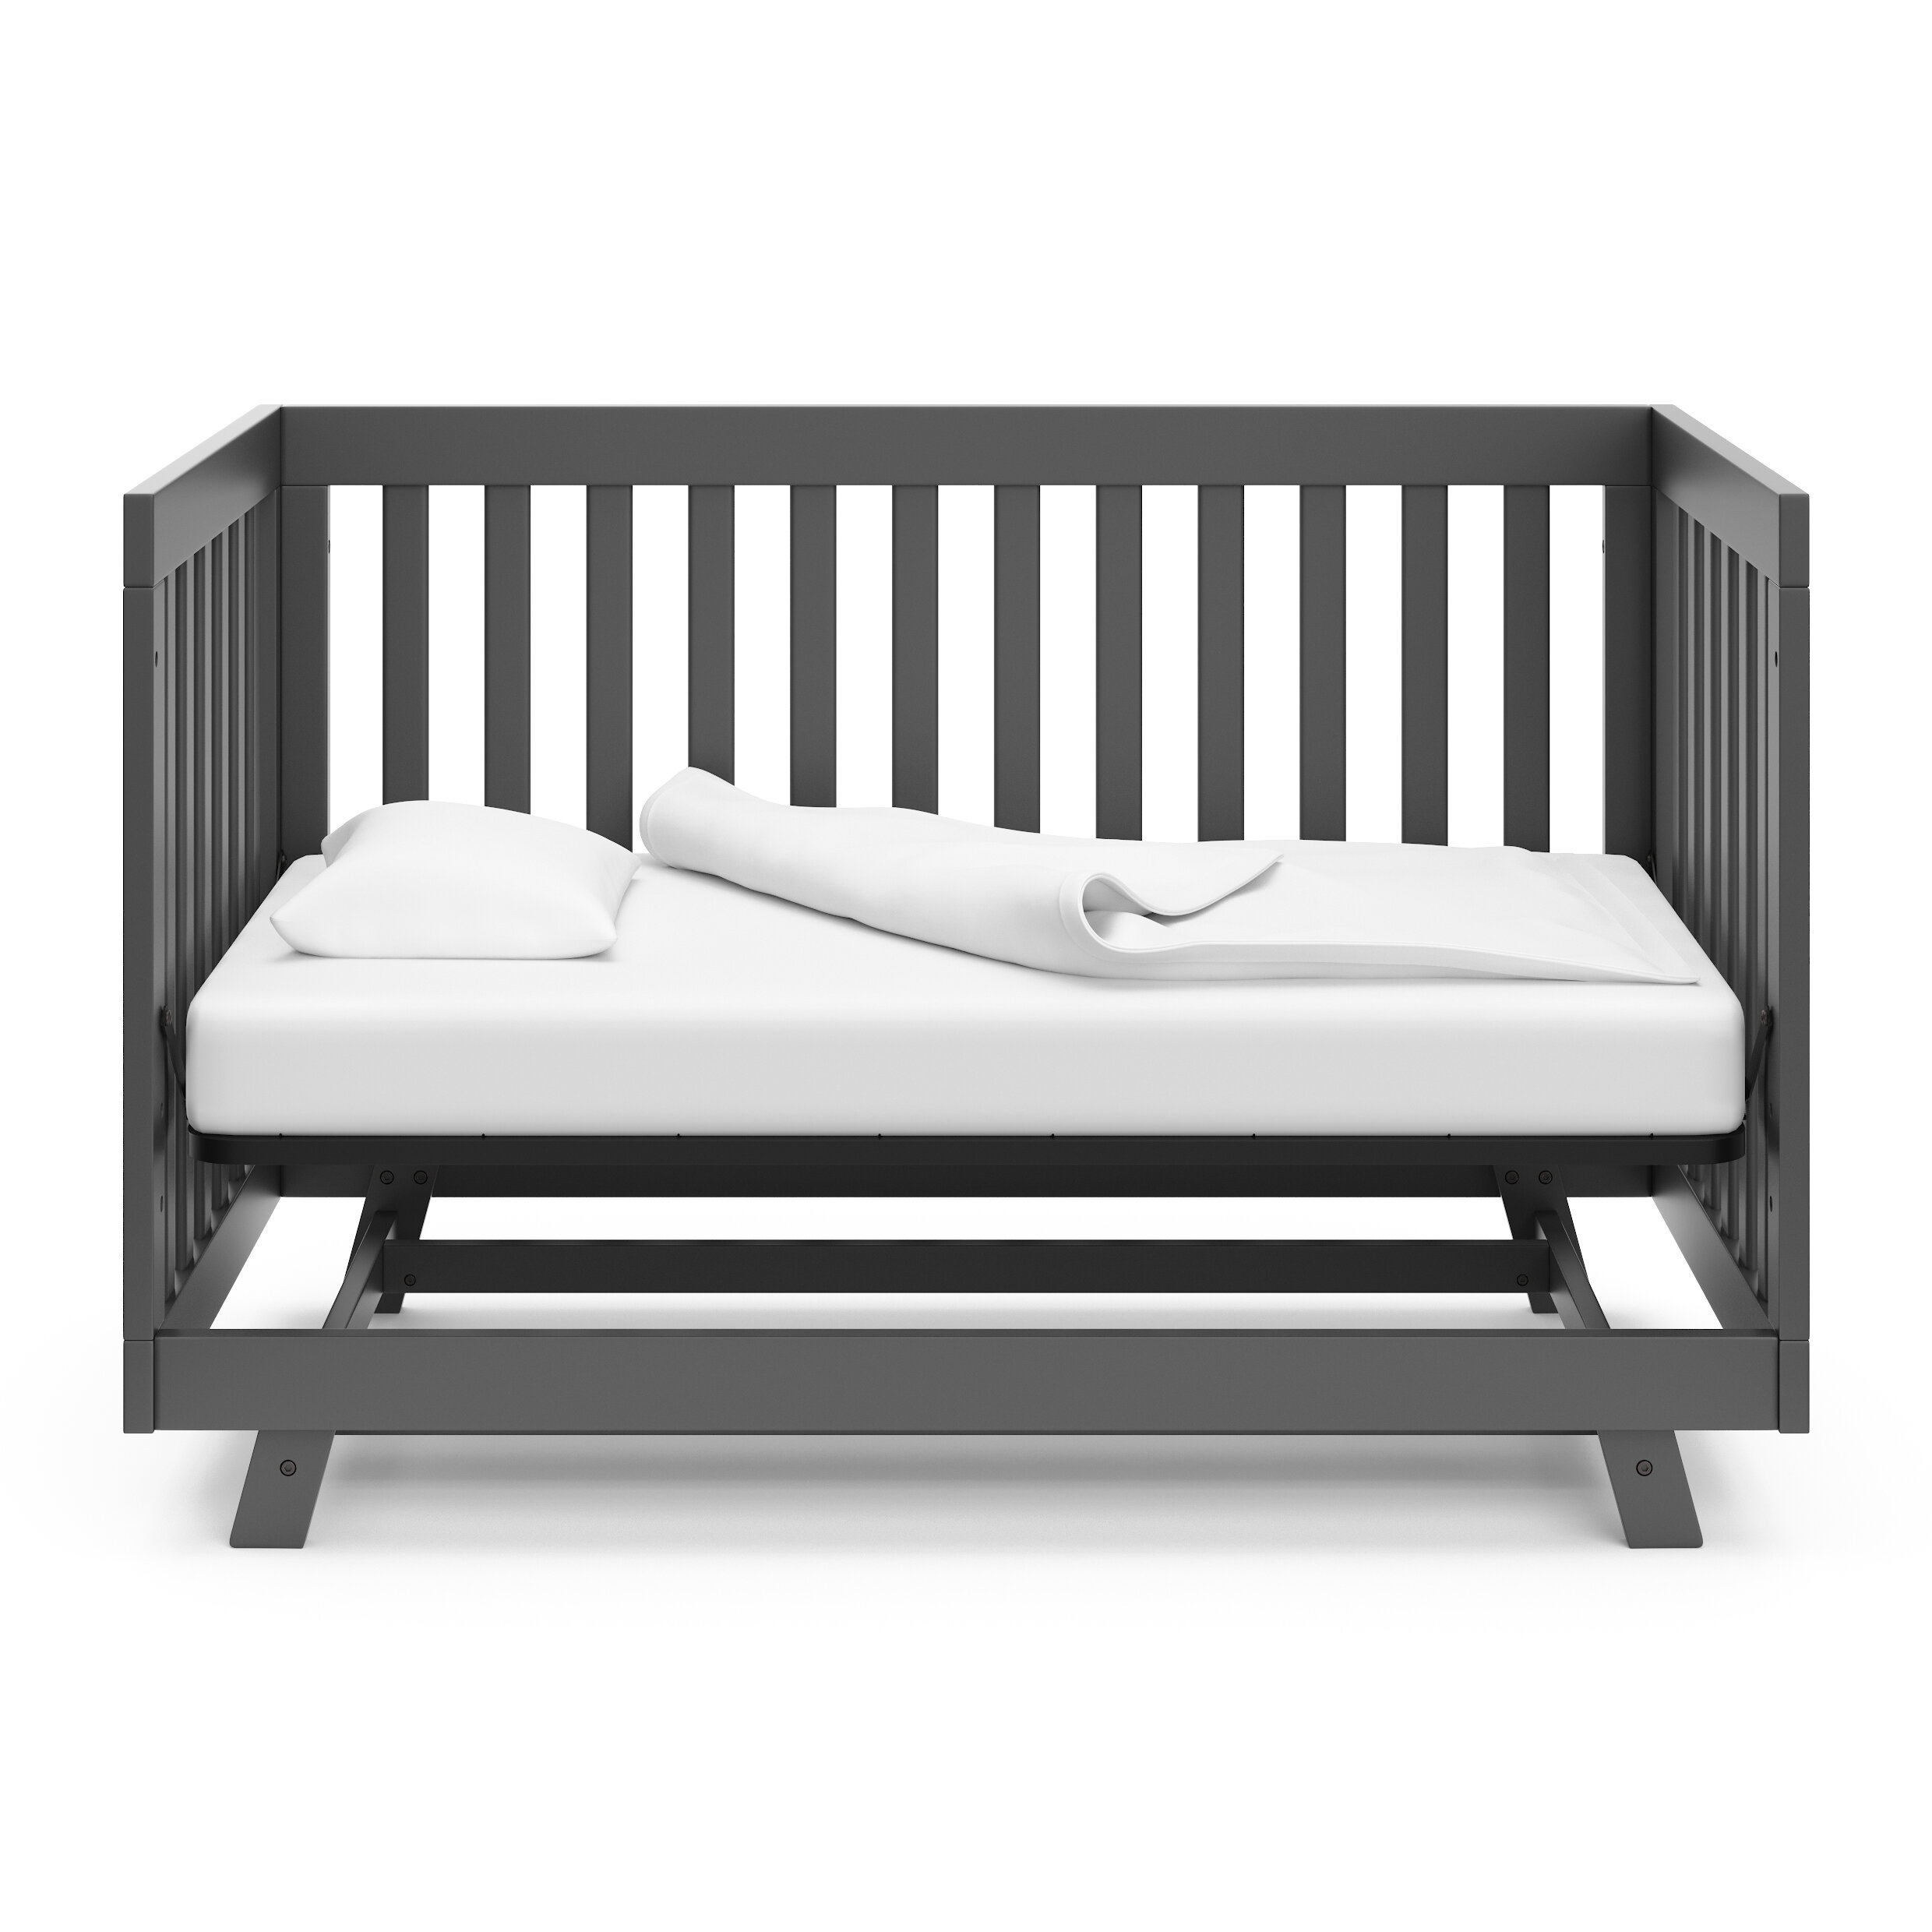 Converts to Toddler Bed Day Bed or Full Bed Solid Pine and Wood Product Construction Mattress Not Included Fixed Side Crib Storkcraft Beckett 3-in-1 Convertible Crib Pebble Gray 